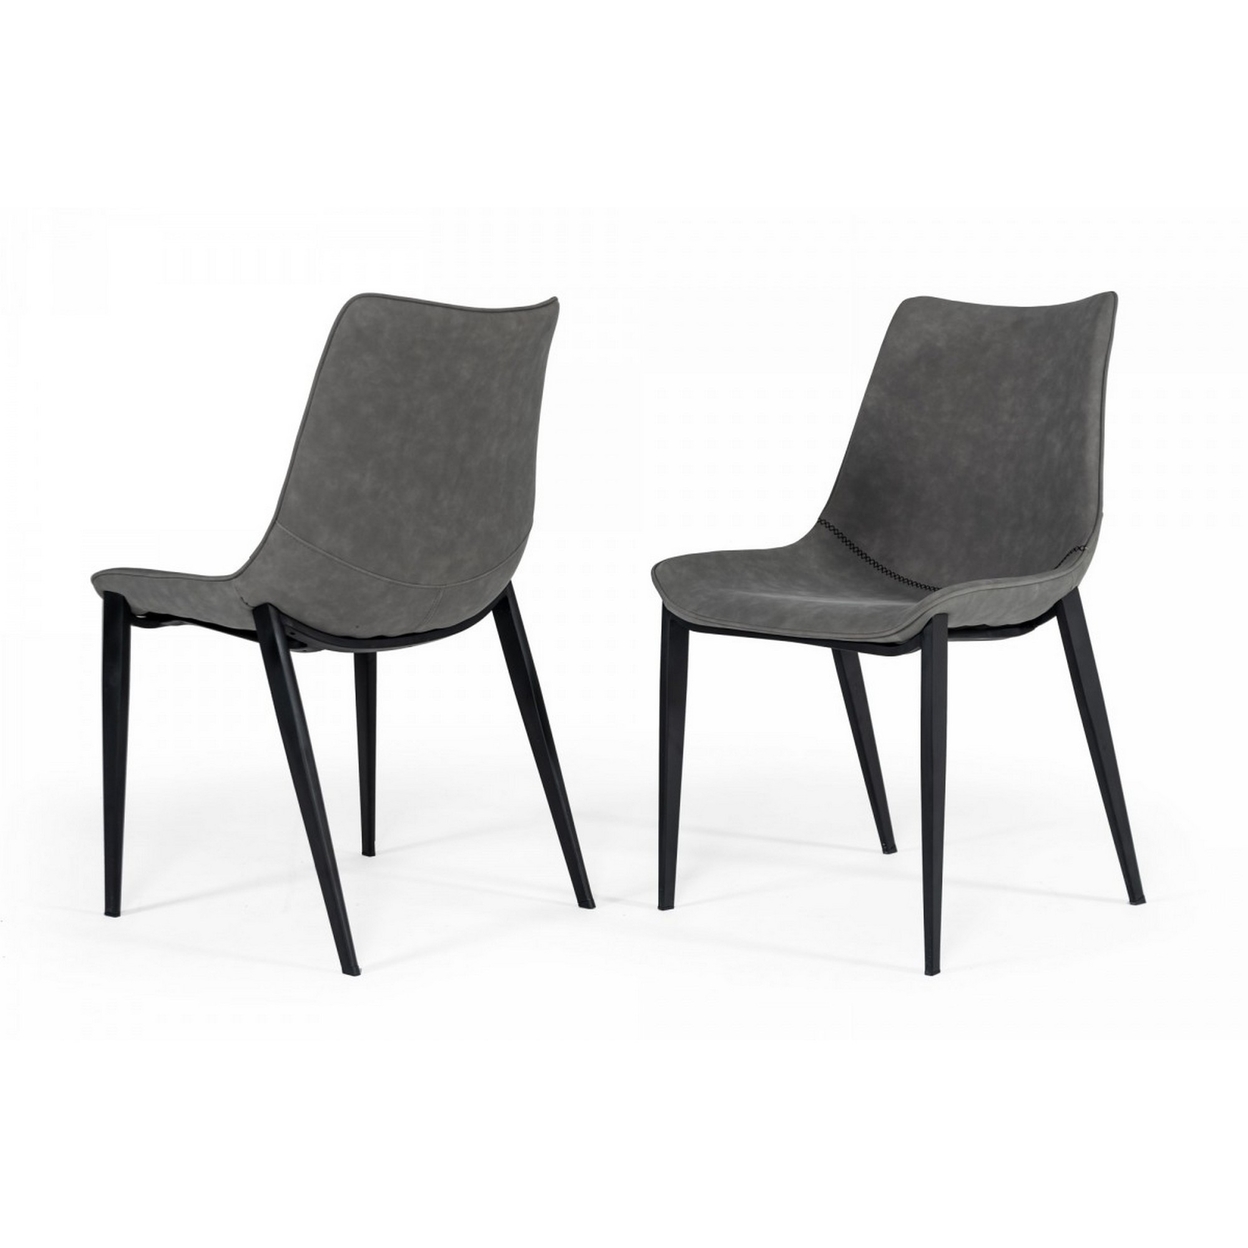 Counter Leatherette Dining Chair With Angled Tapered Legs, Set Of 2, Gray- Saltoro Sherpi